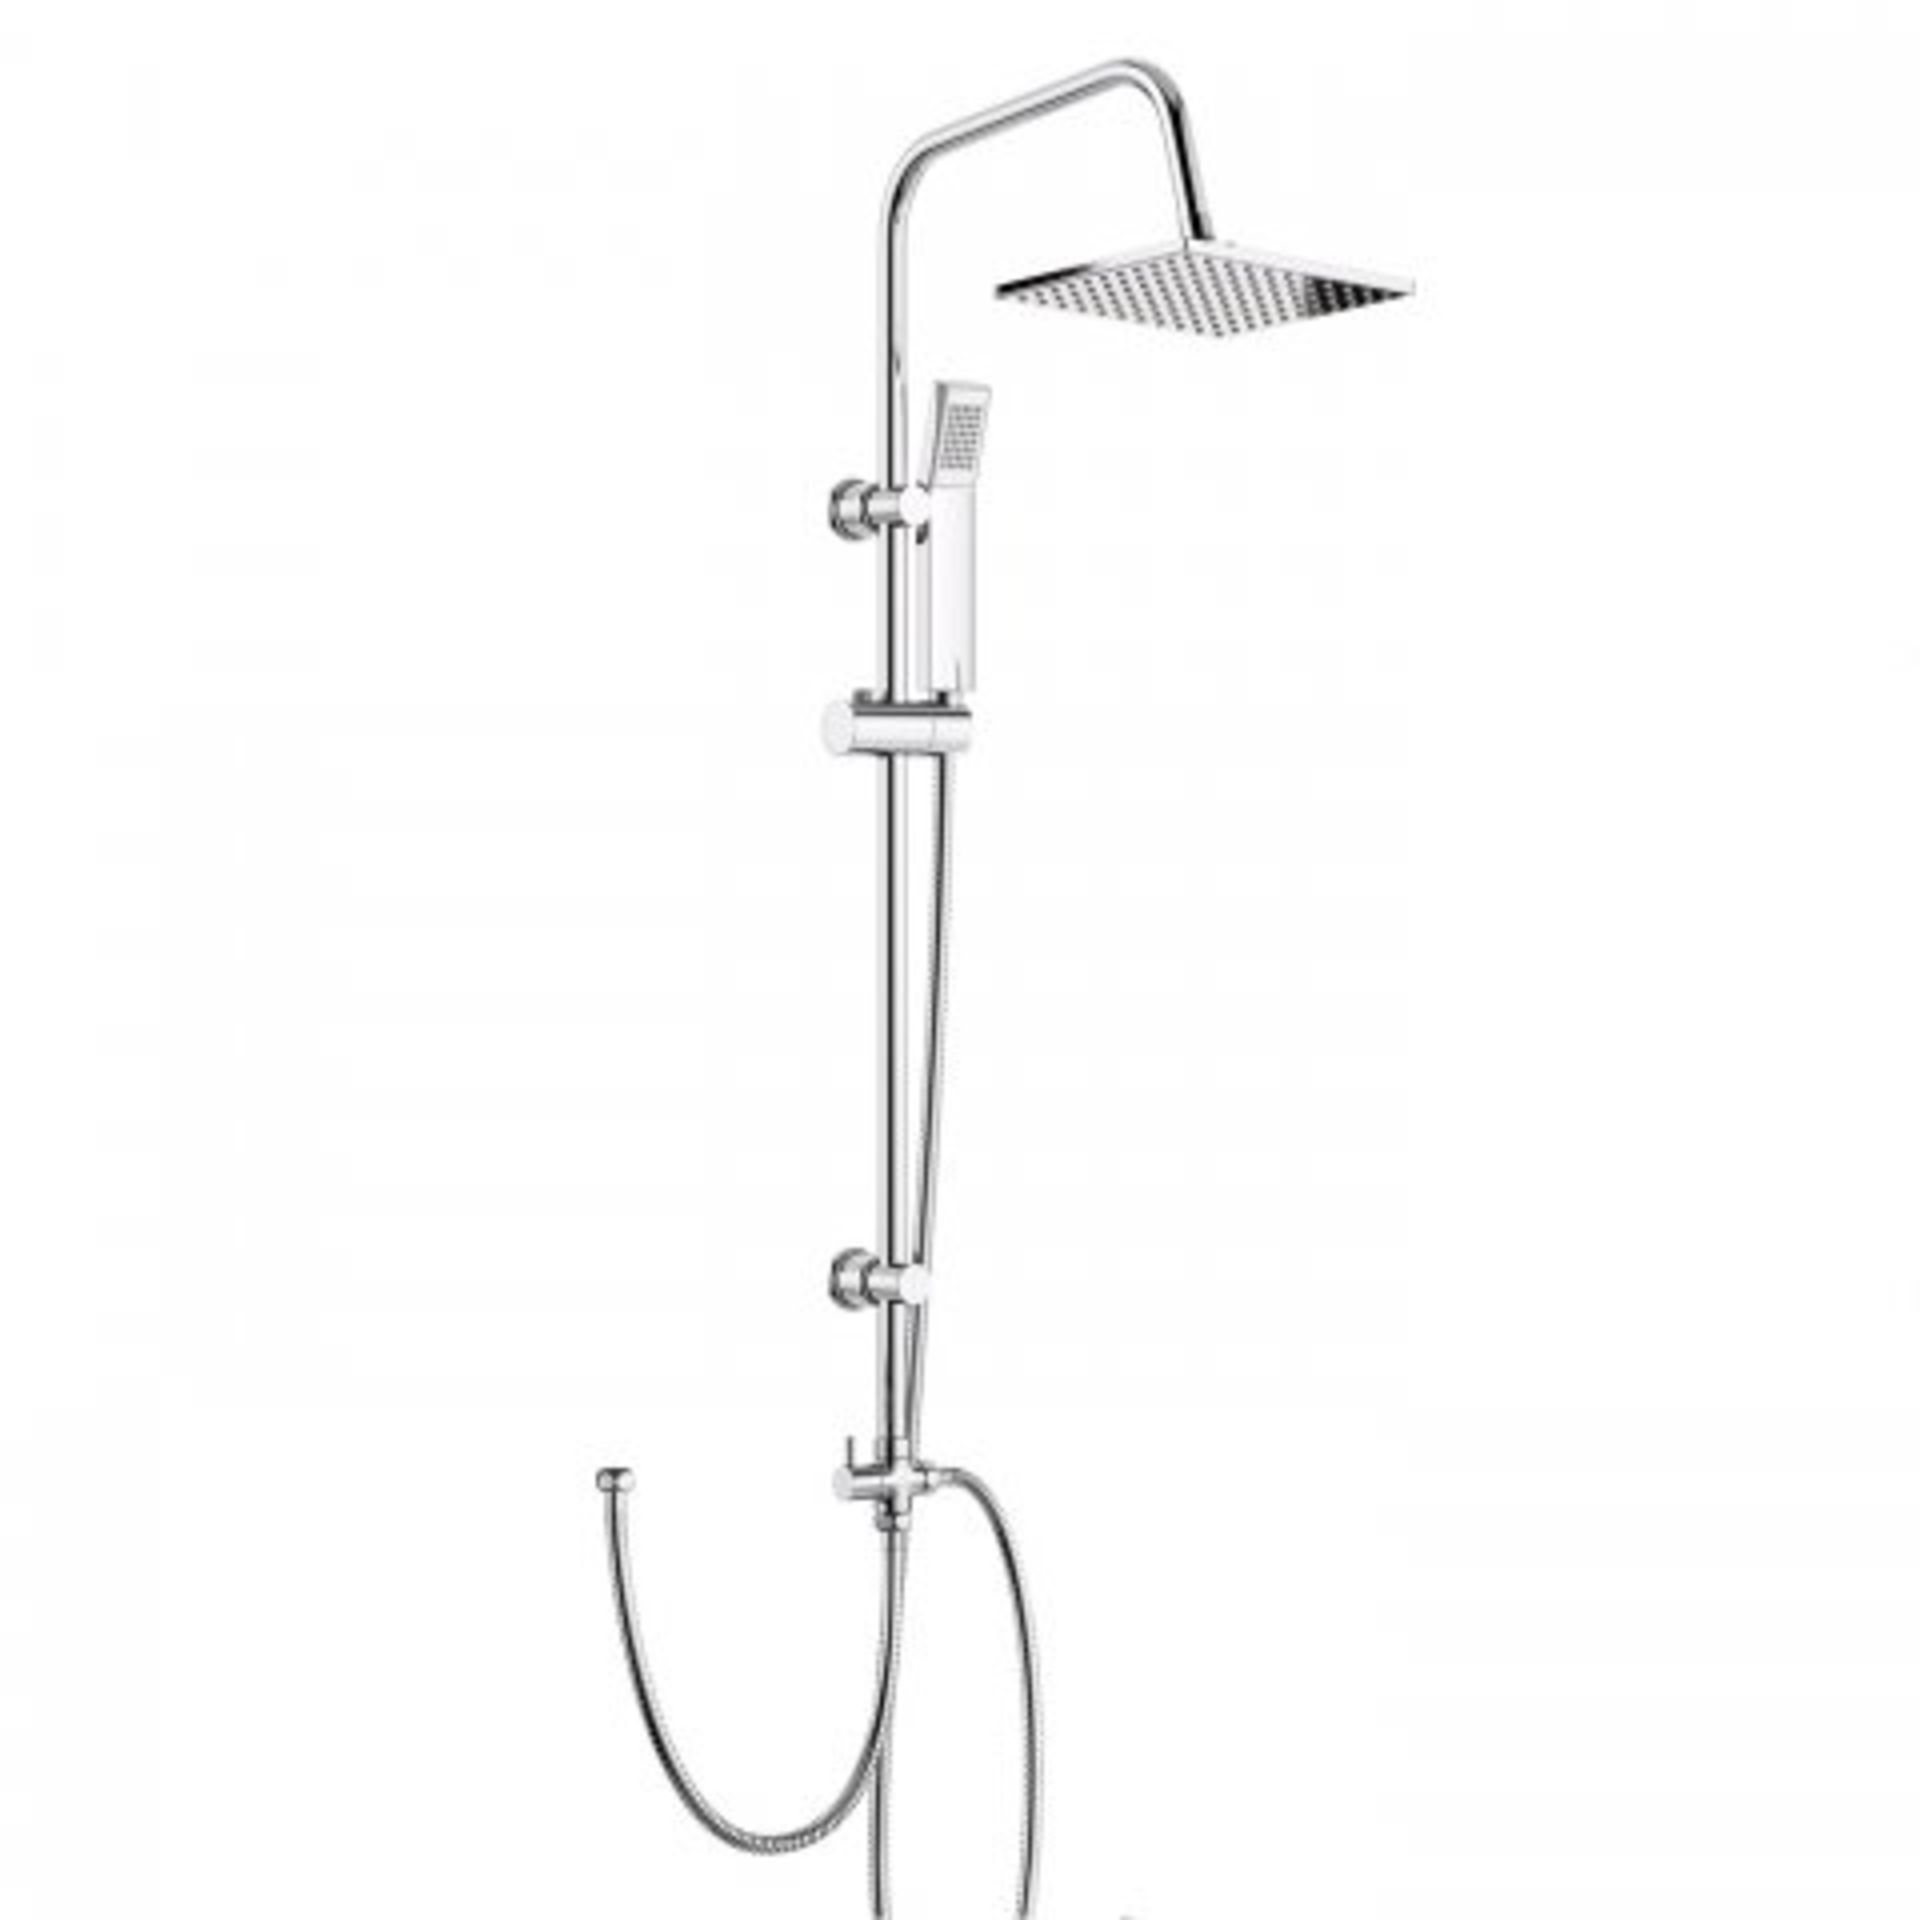 (T208) Square Exposed Thermostatic Shower Kit & Medium Shower Head. The straight lines and - Image 4 of 7